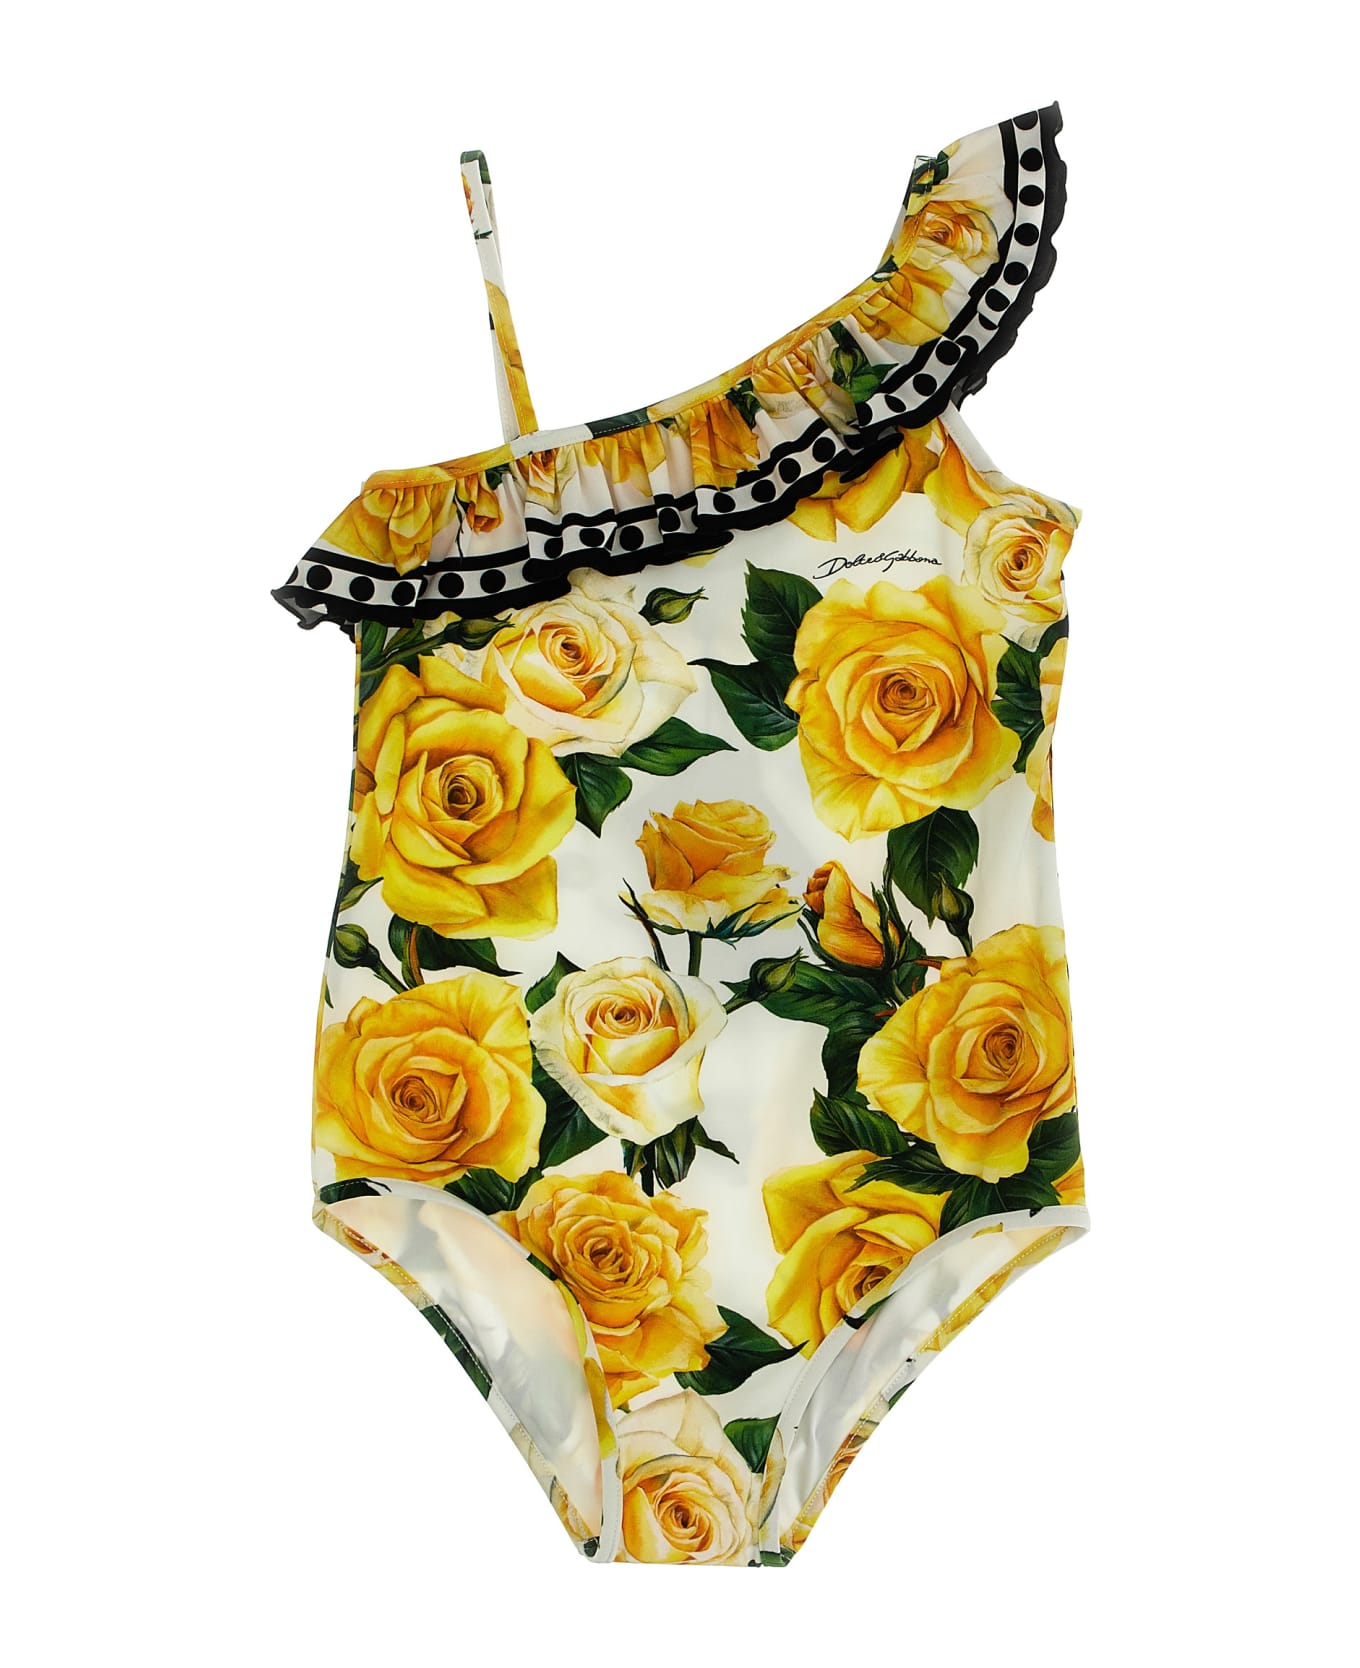 Dolce & Gabbana 'rose Gialle' One-piece Swimsuit - Multicolor